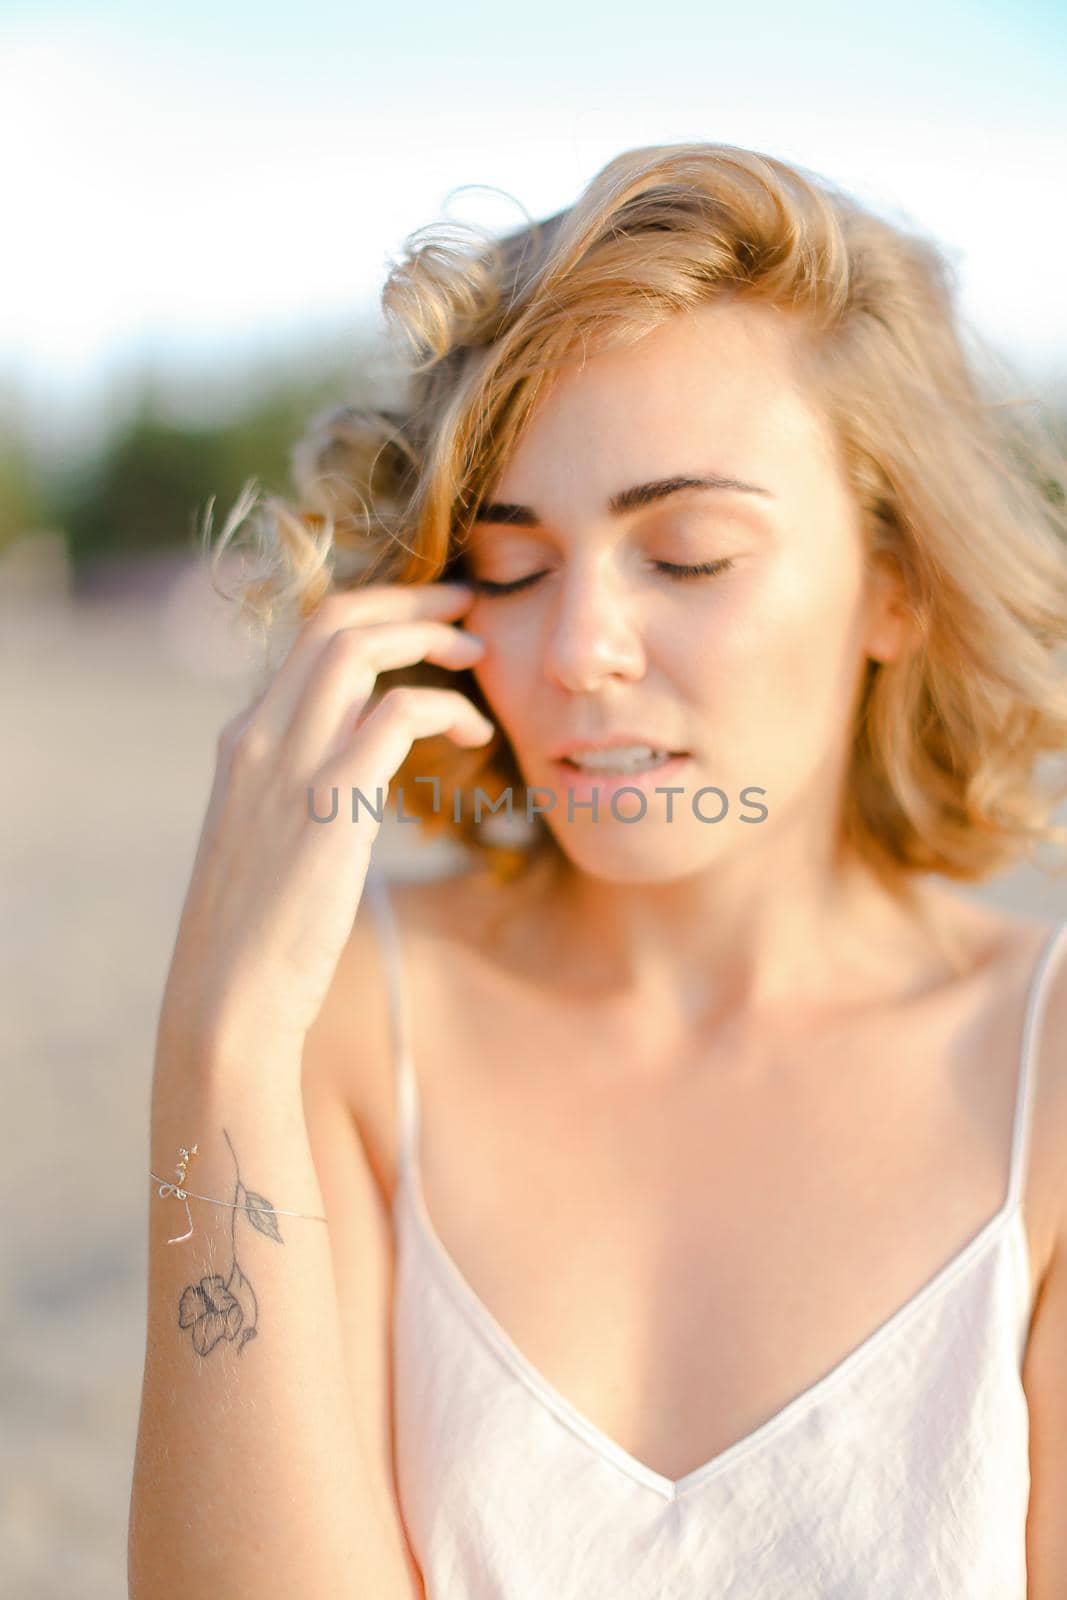 Close up portrait of young blonde nice woman without makeup. Concept of natural beauty and feamale person.